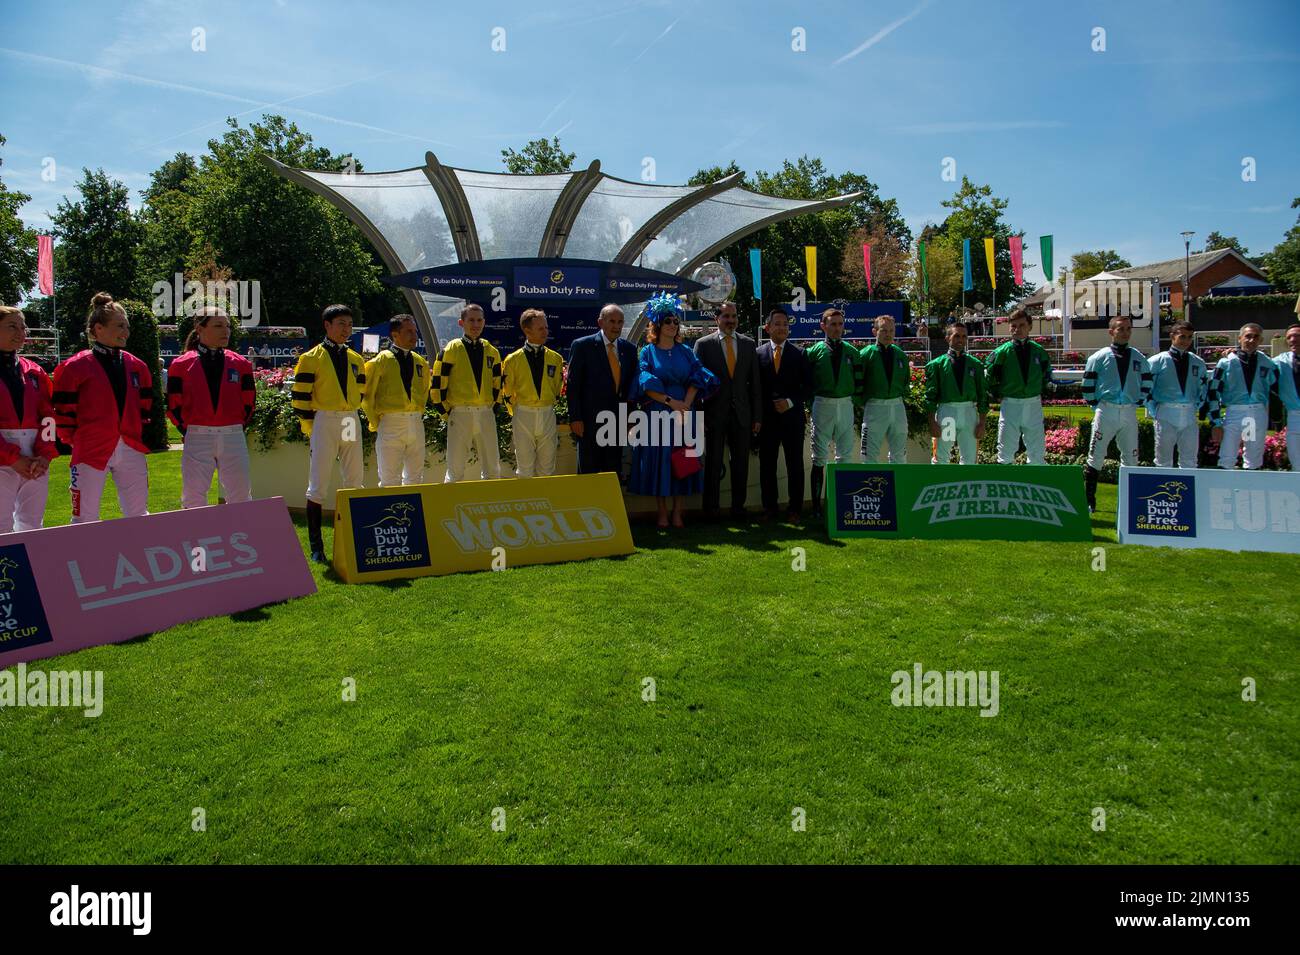 Ascot, Berkshire, UK. 6th August, 2022. The four teams ready to race in the Dubai Duty Free Shergar Cup horse racing at Ascot Racecourse. Credit: Maureen McLean/Alamy Stock Photo